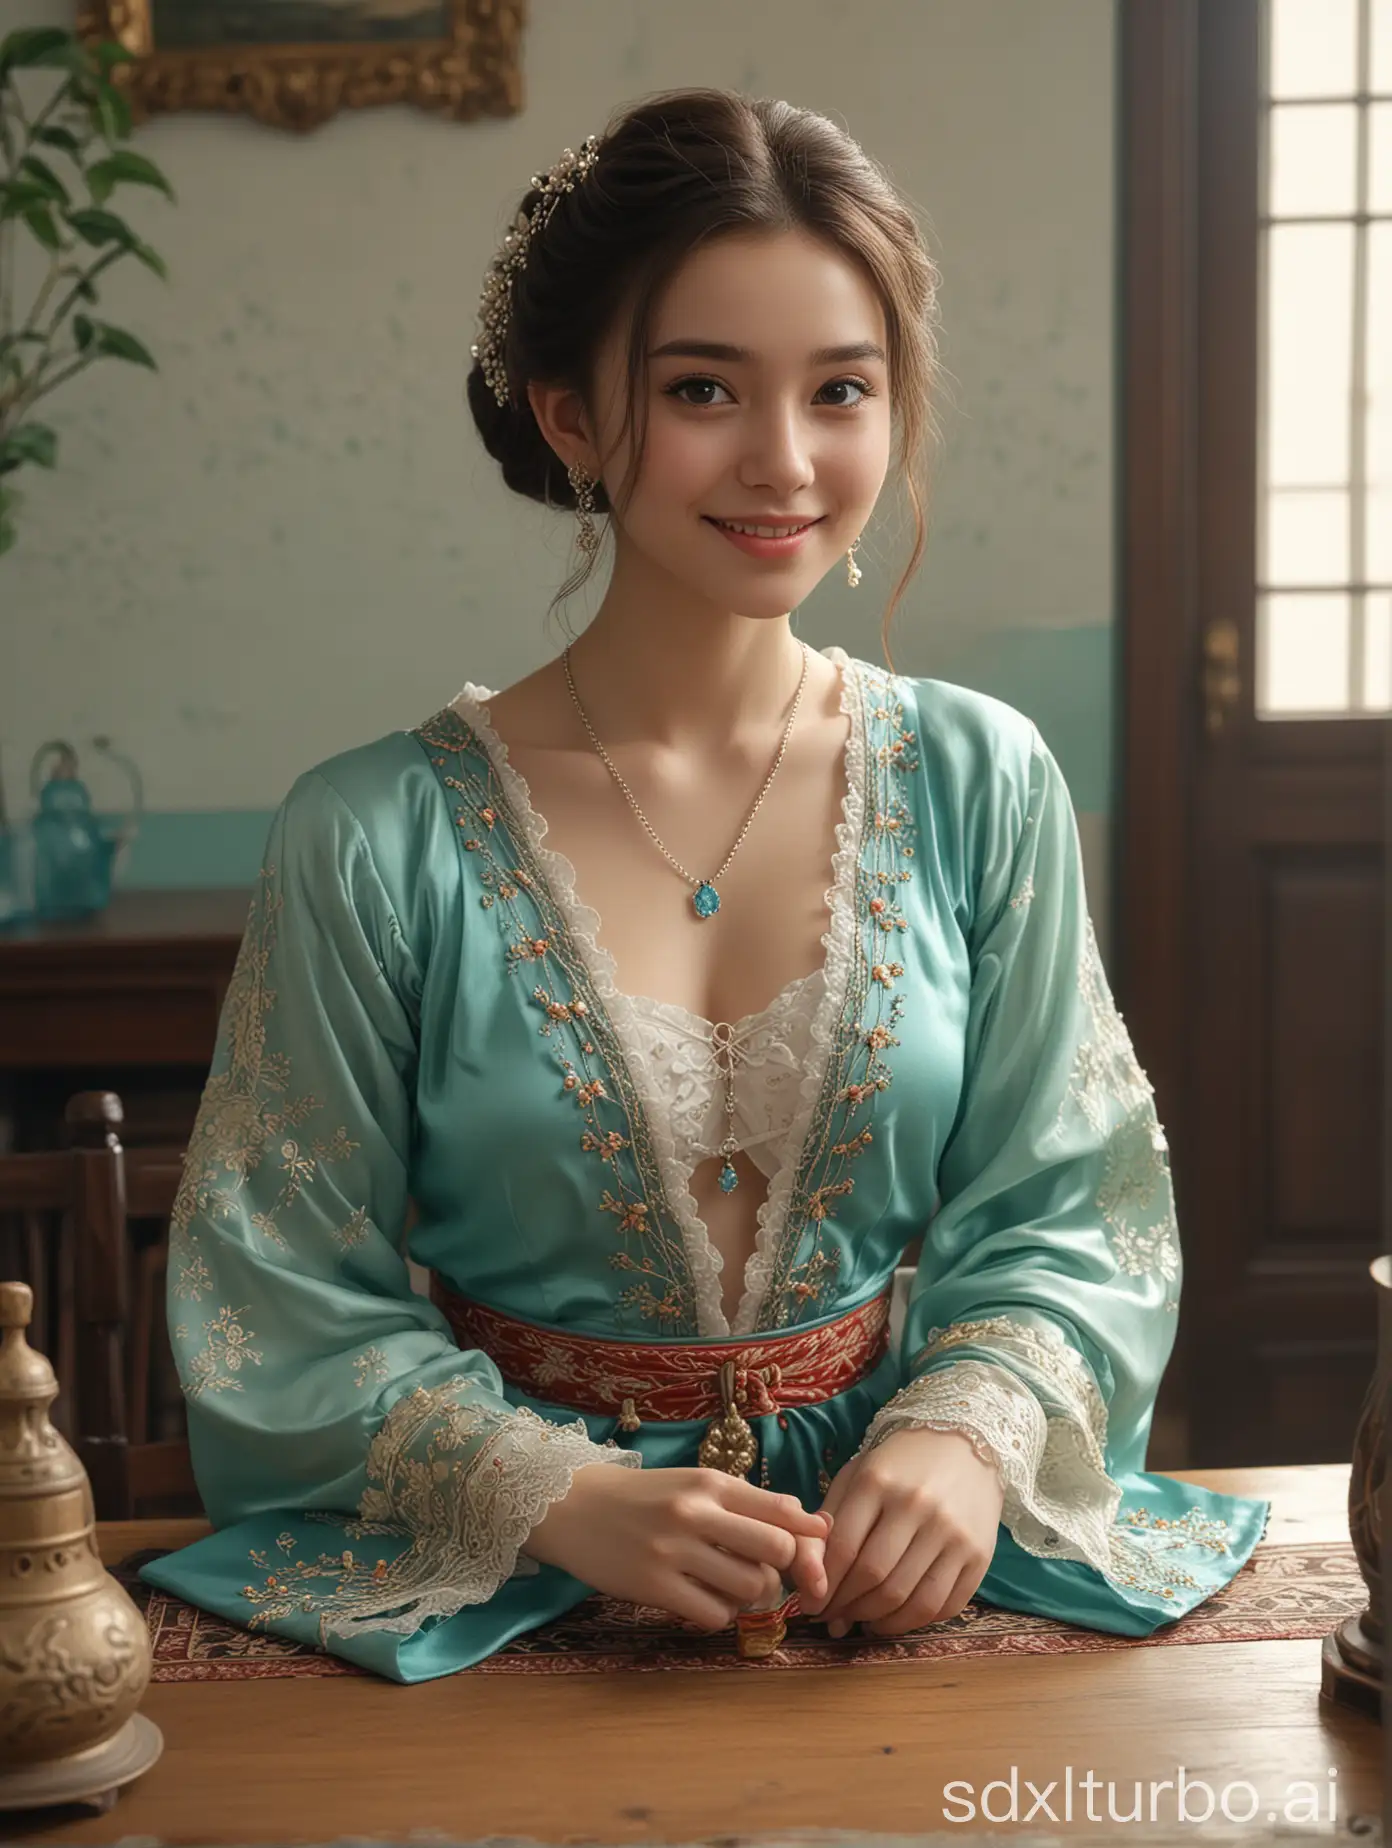 Girl-in-Cyan-Hanfu-Dress-and-Necklace-Posing-Gracefully-on-Table